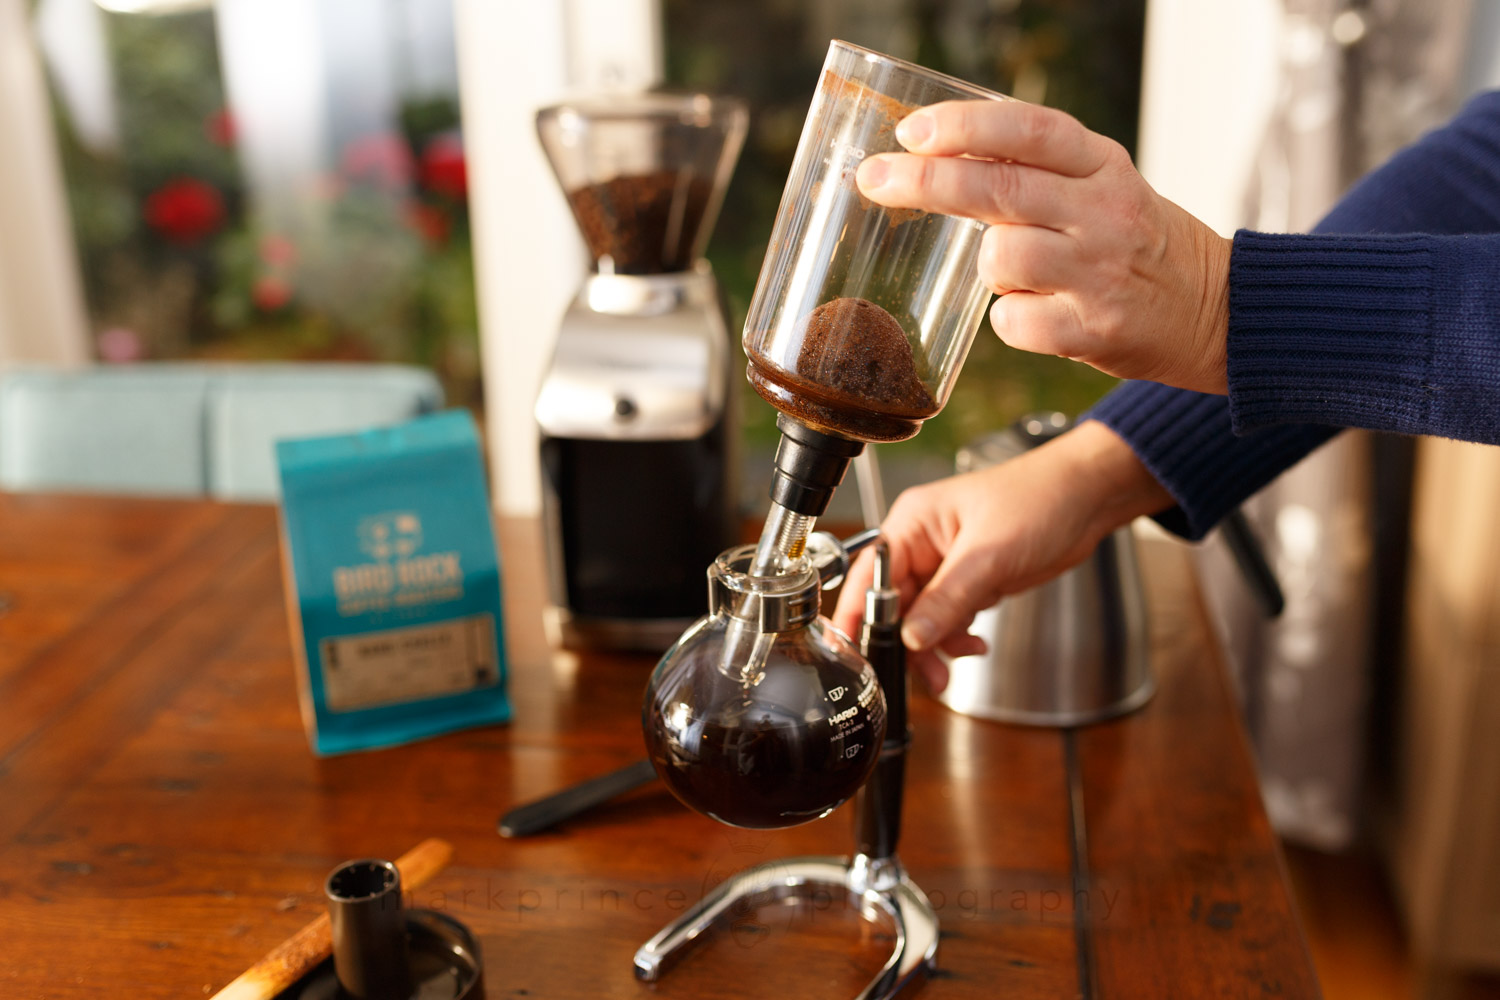 How to Make Siphon Coffee